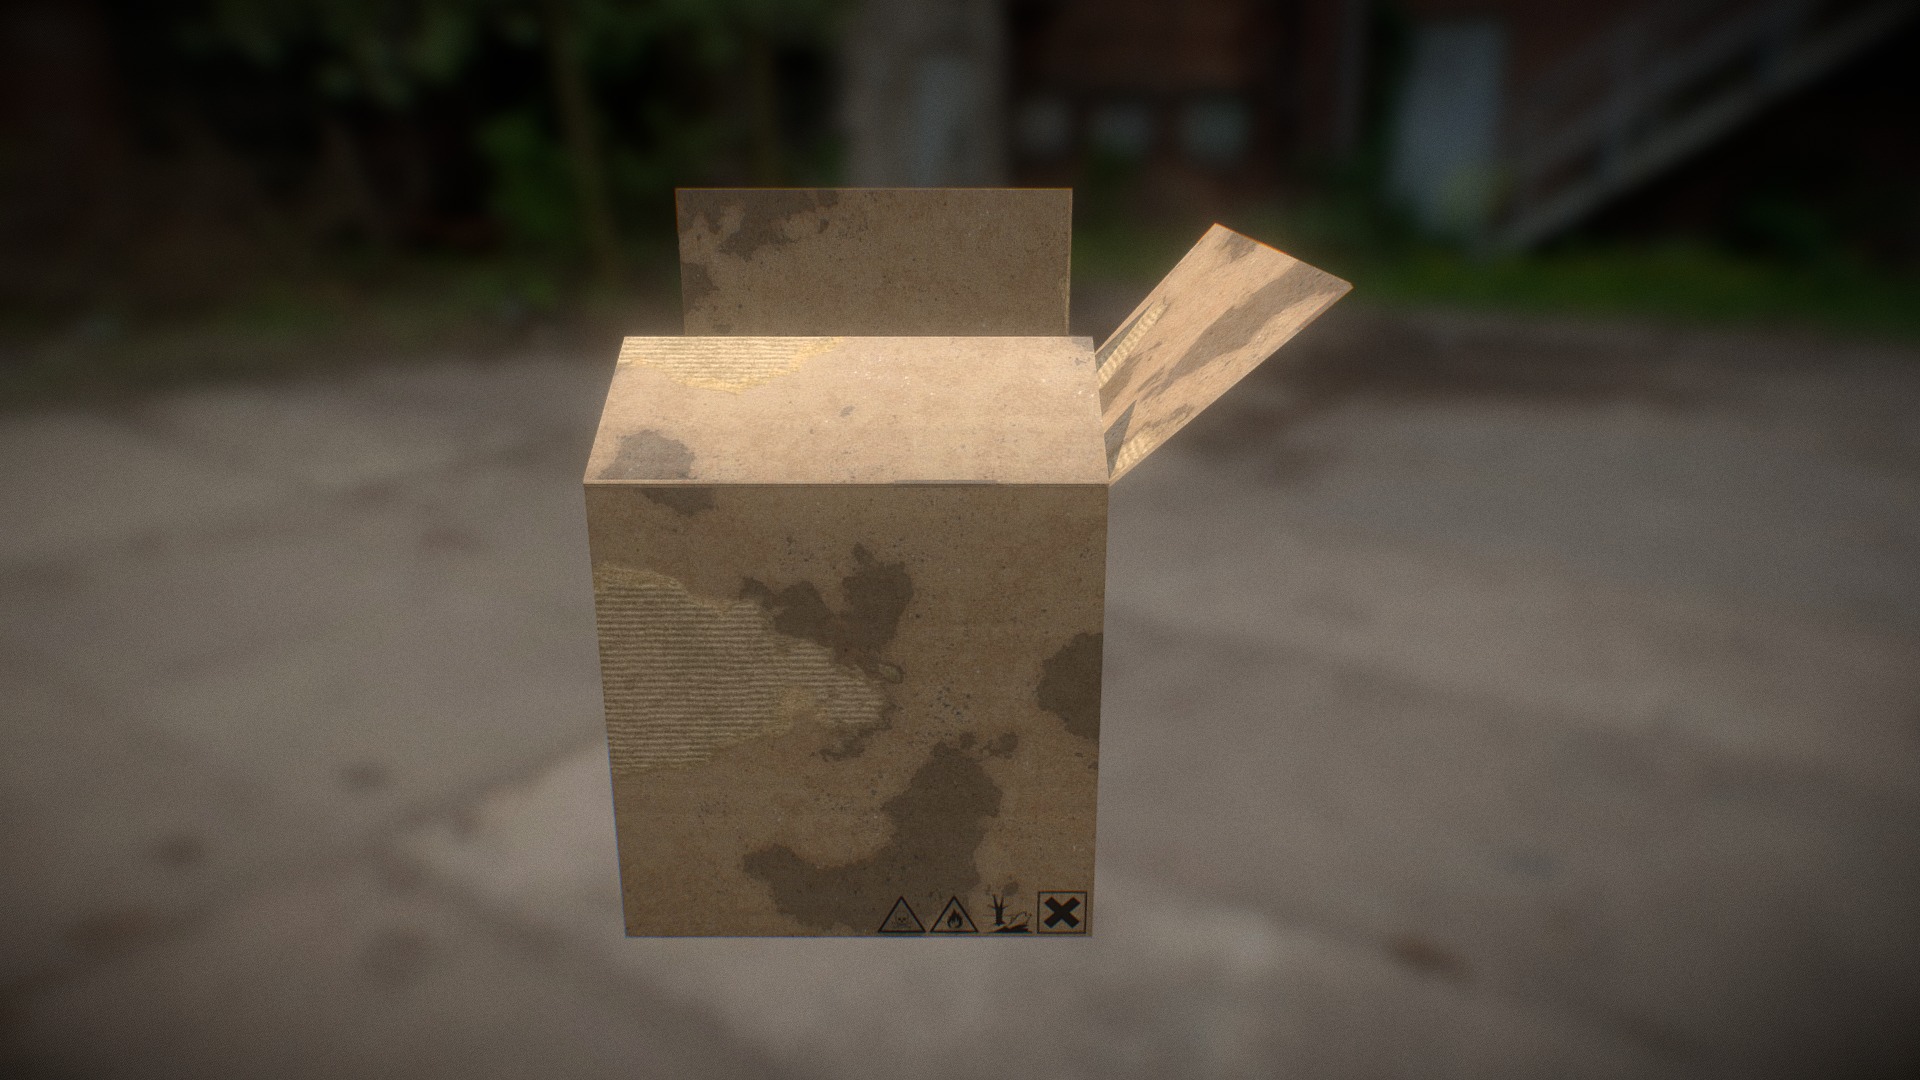 3D model cardboard box - This is a 3D model of the cardboard box. The 3D model is about a cardboard box on a table.